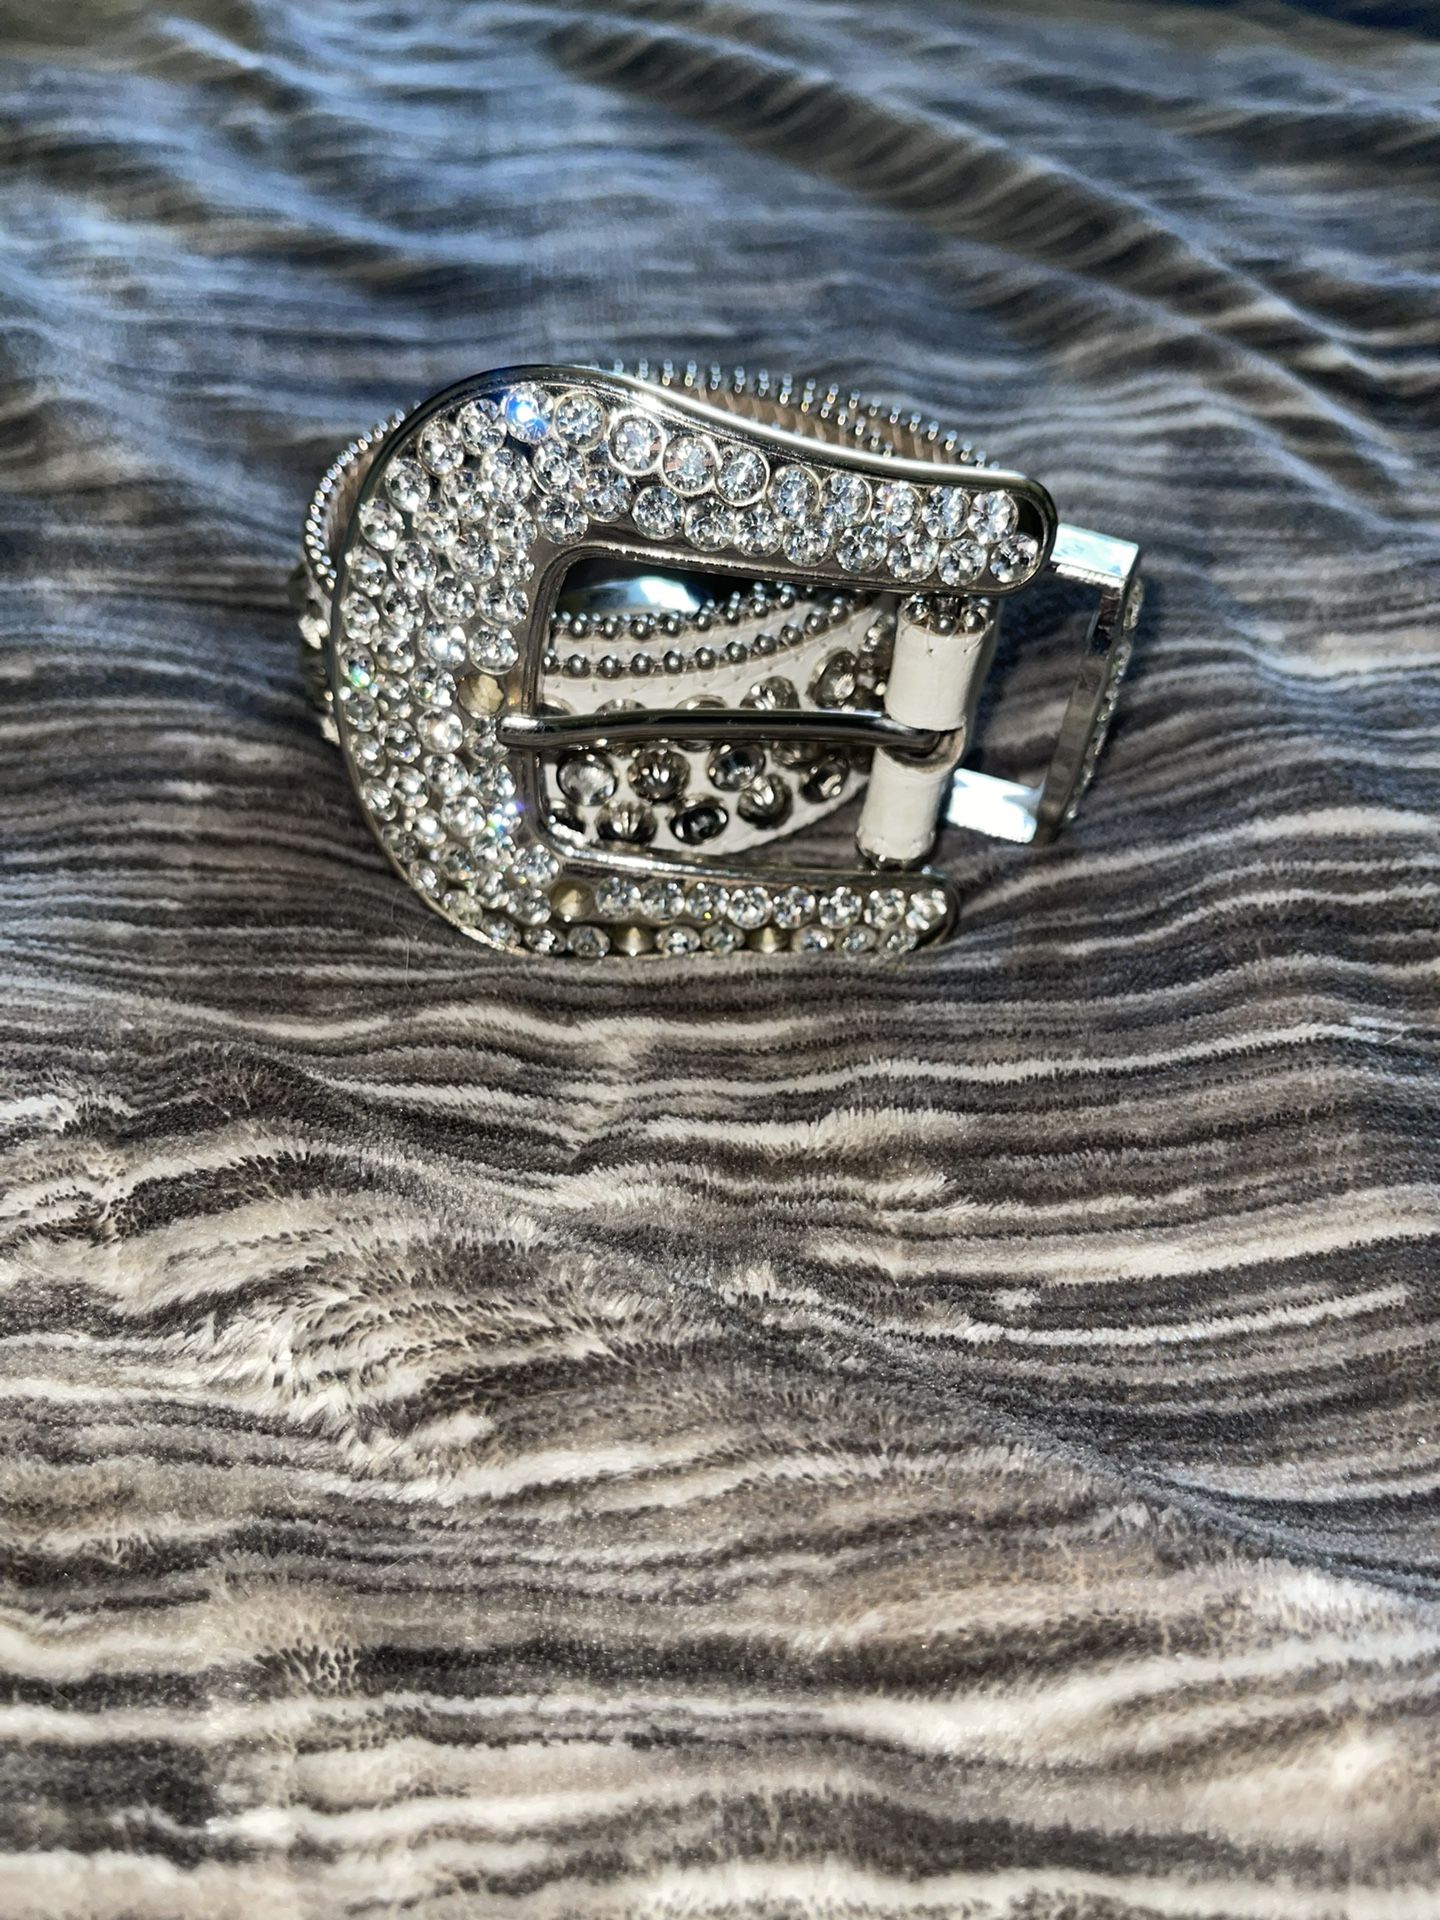 BB Simon Belt for Sale in San Diego, CA - OfferUp